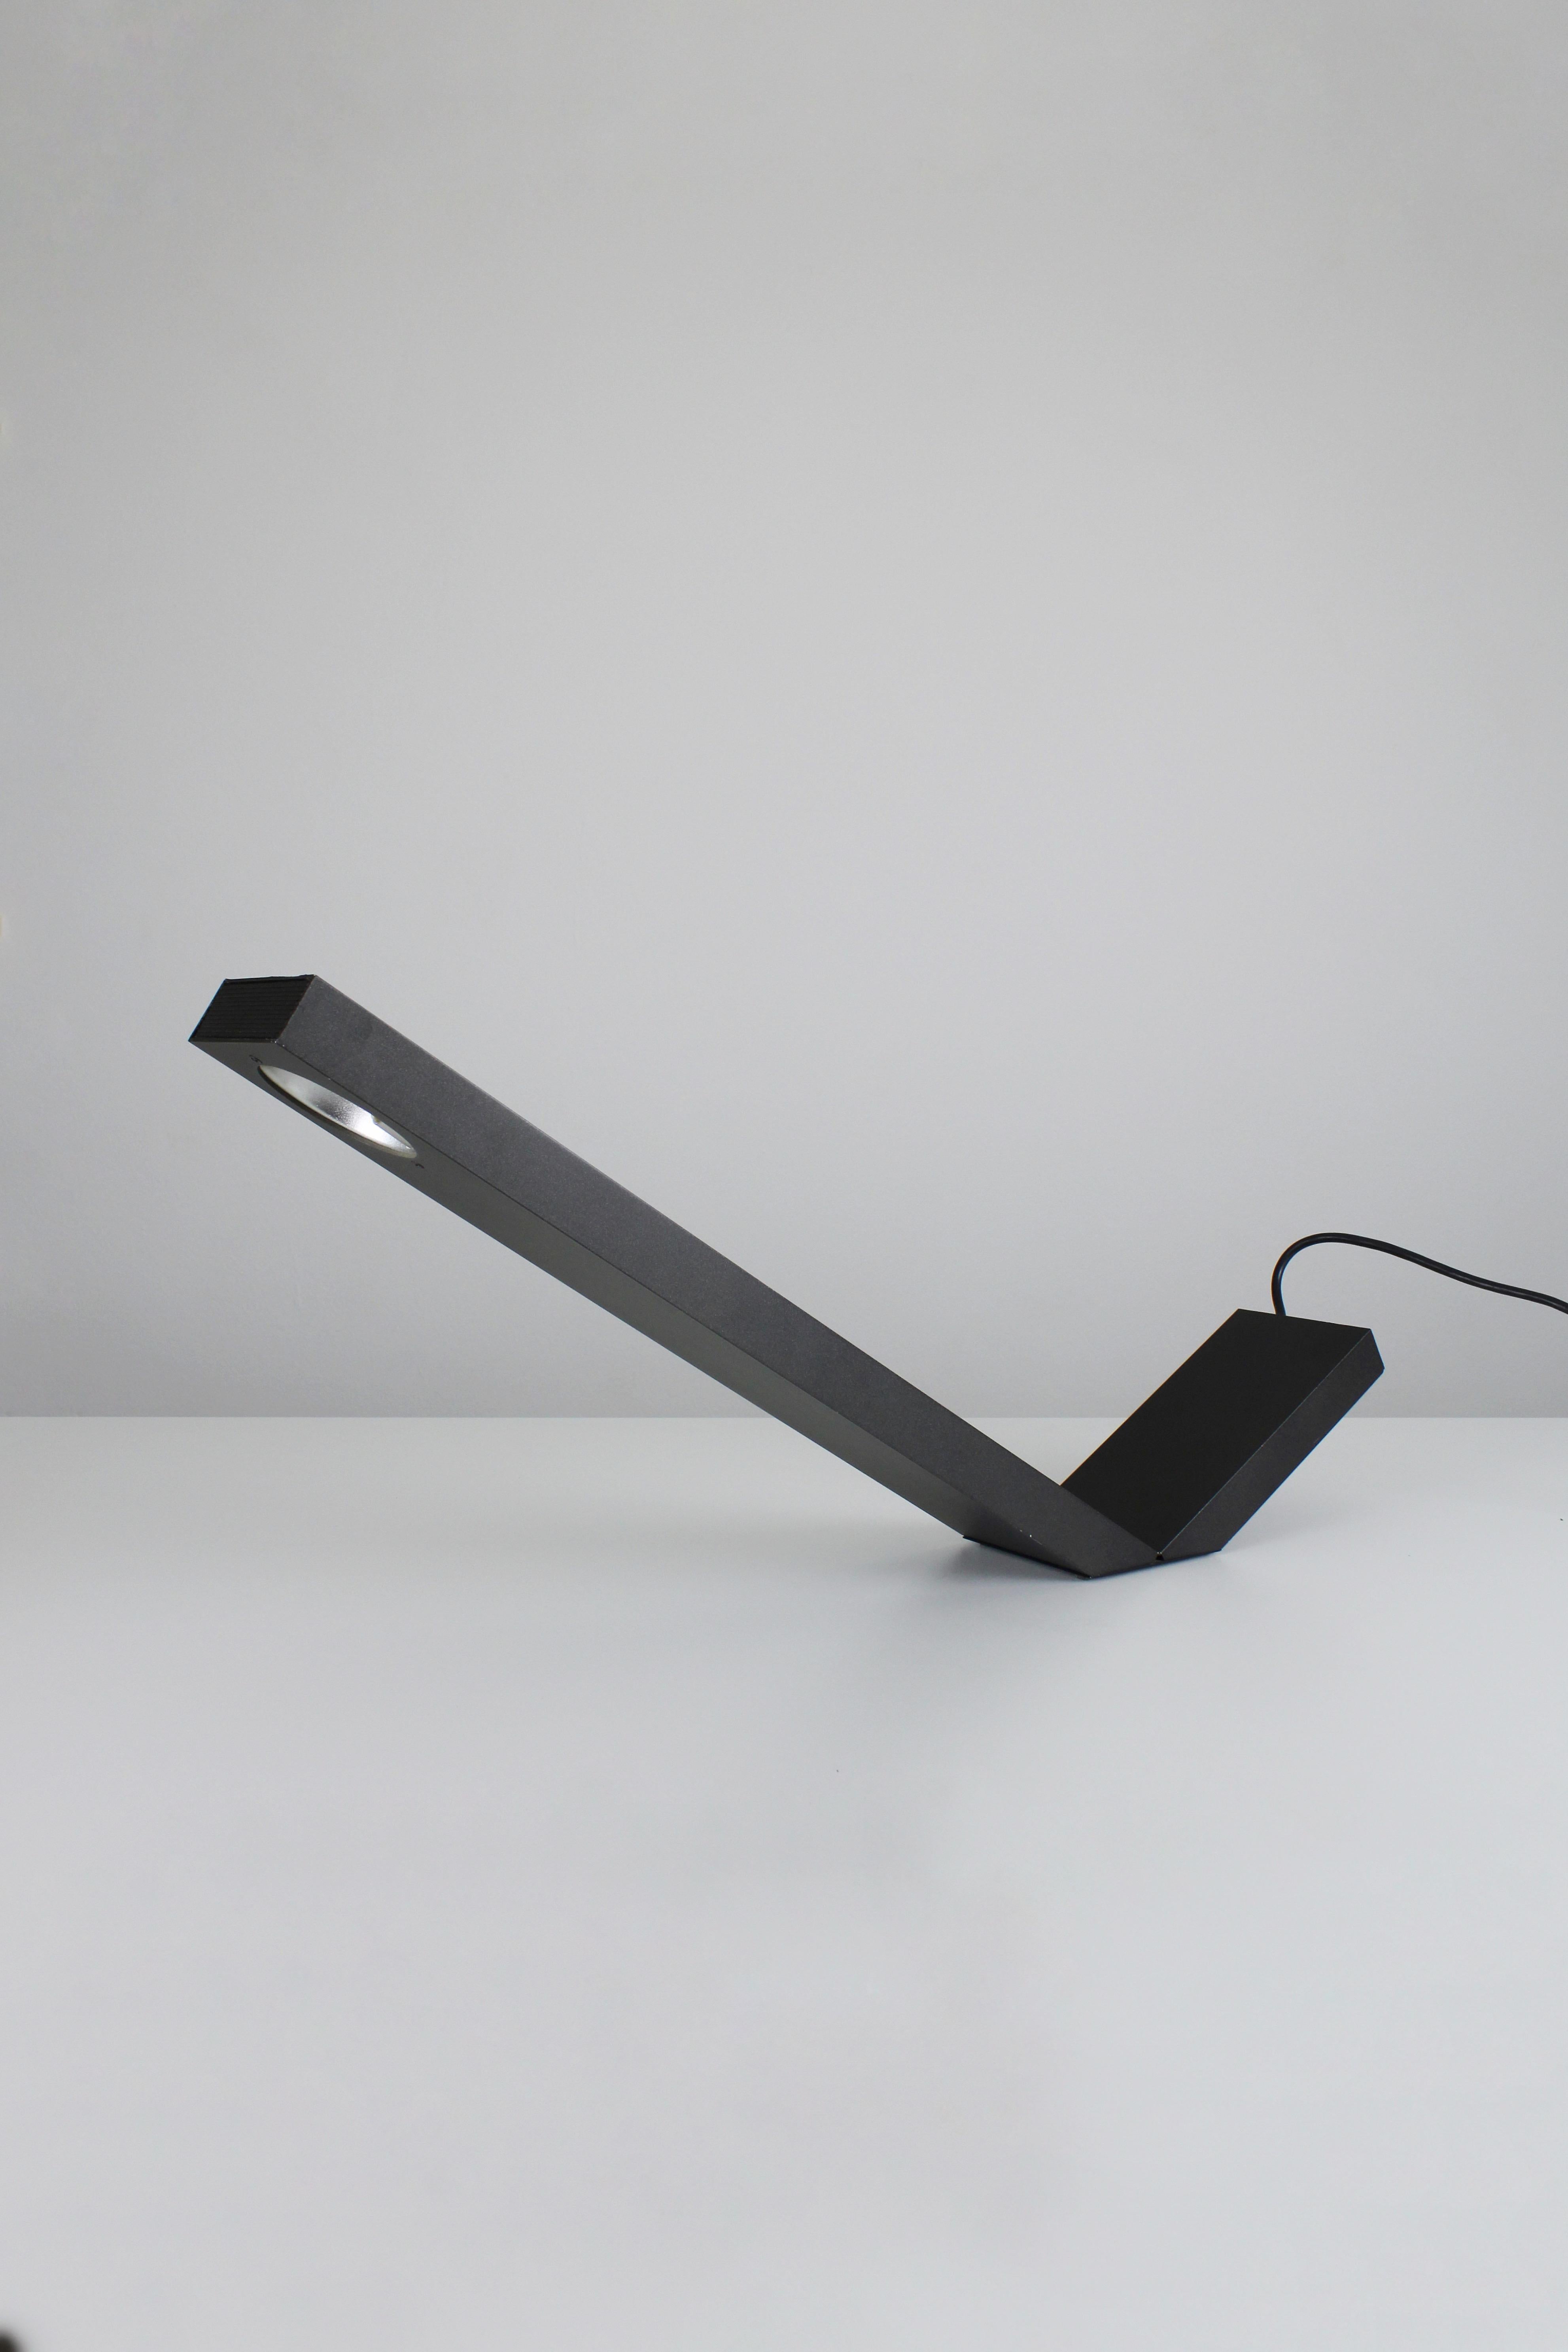 Post-Modern Sculptural Desk Lamp by Marco Zotta for Eleusi, 1980s For Sale